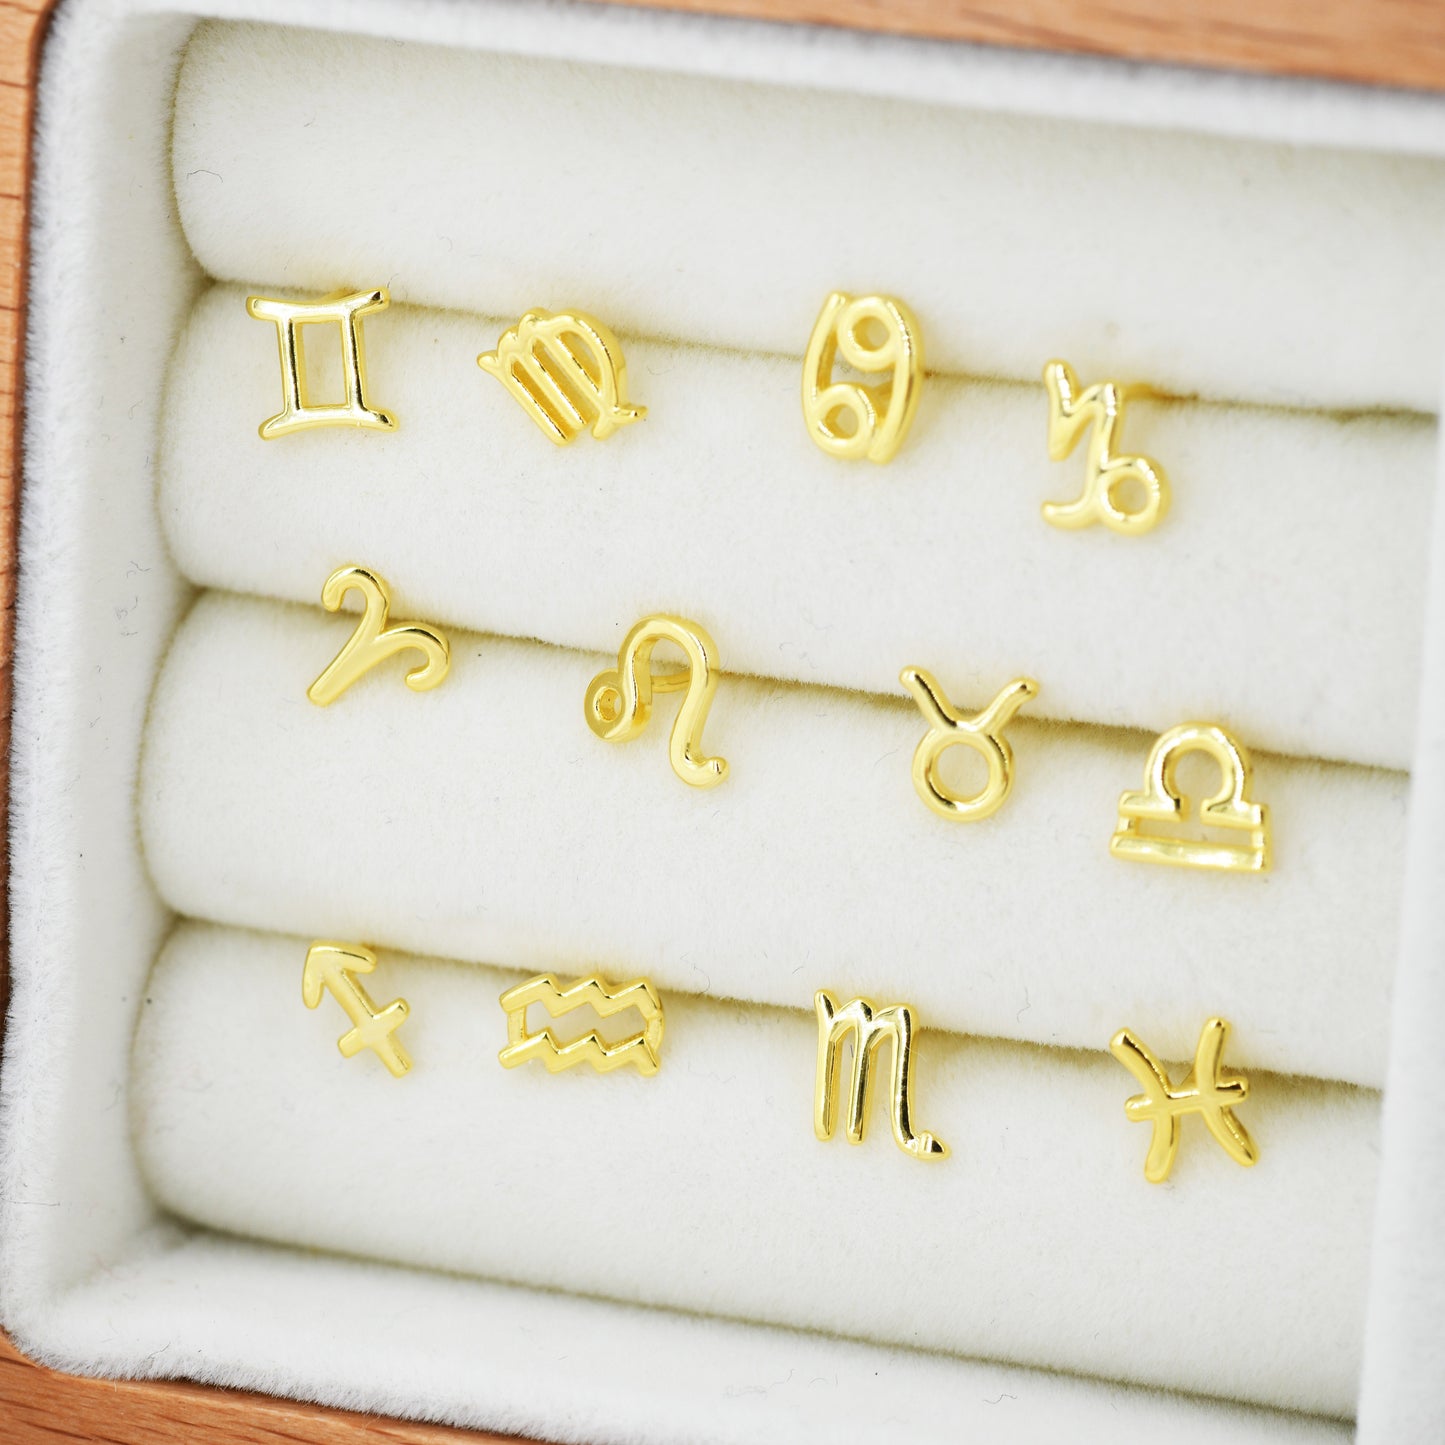 Pair of Zodiac Earring in Sterling Silver, Silver or Gold, Horoscope Stud Earrings . Fun and Quirky Design